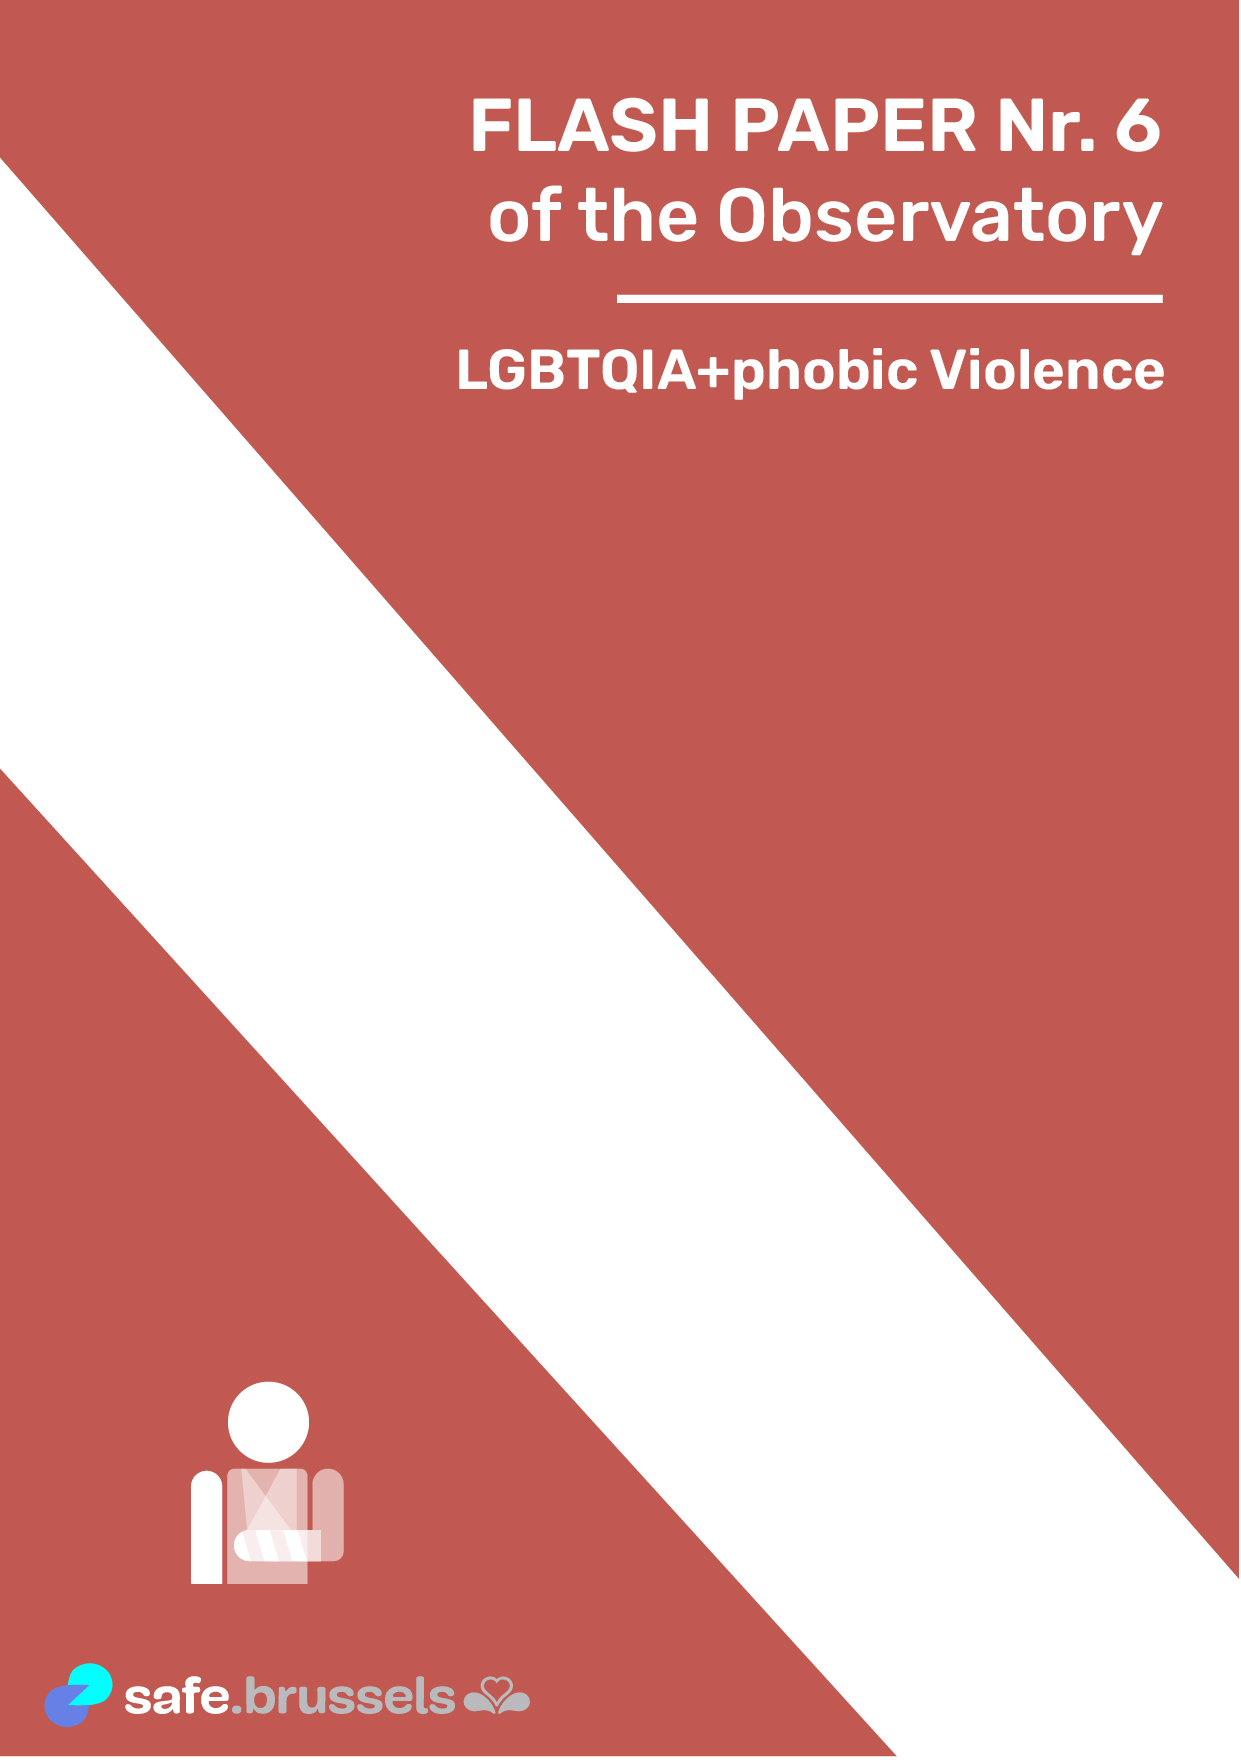 LGBTQIA+phobic Violence: Overview of the situation in the Brussels Region